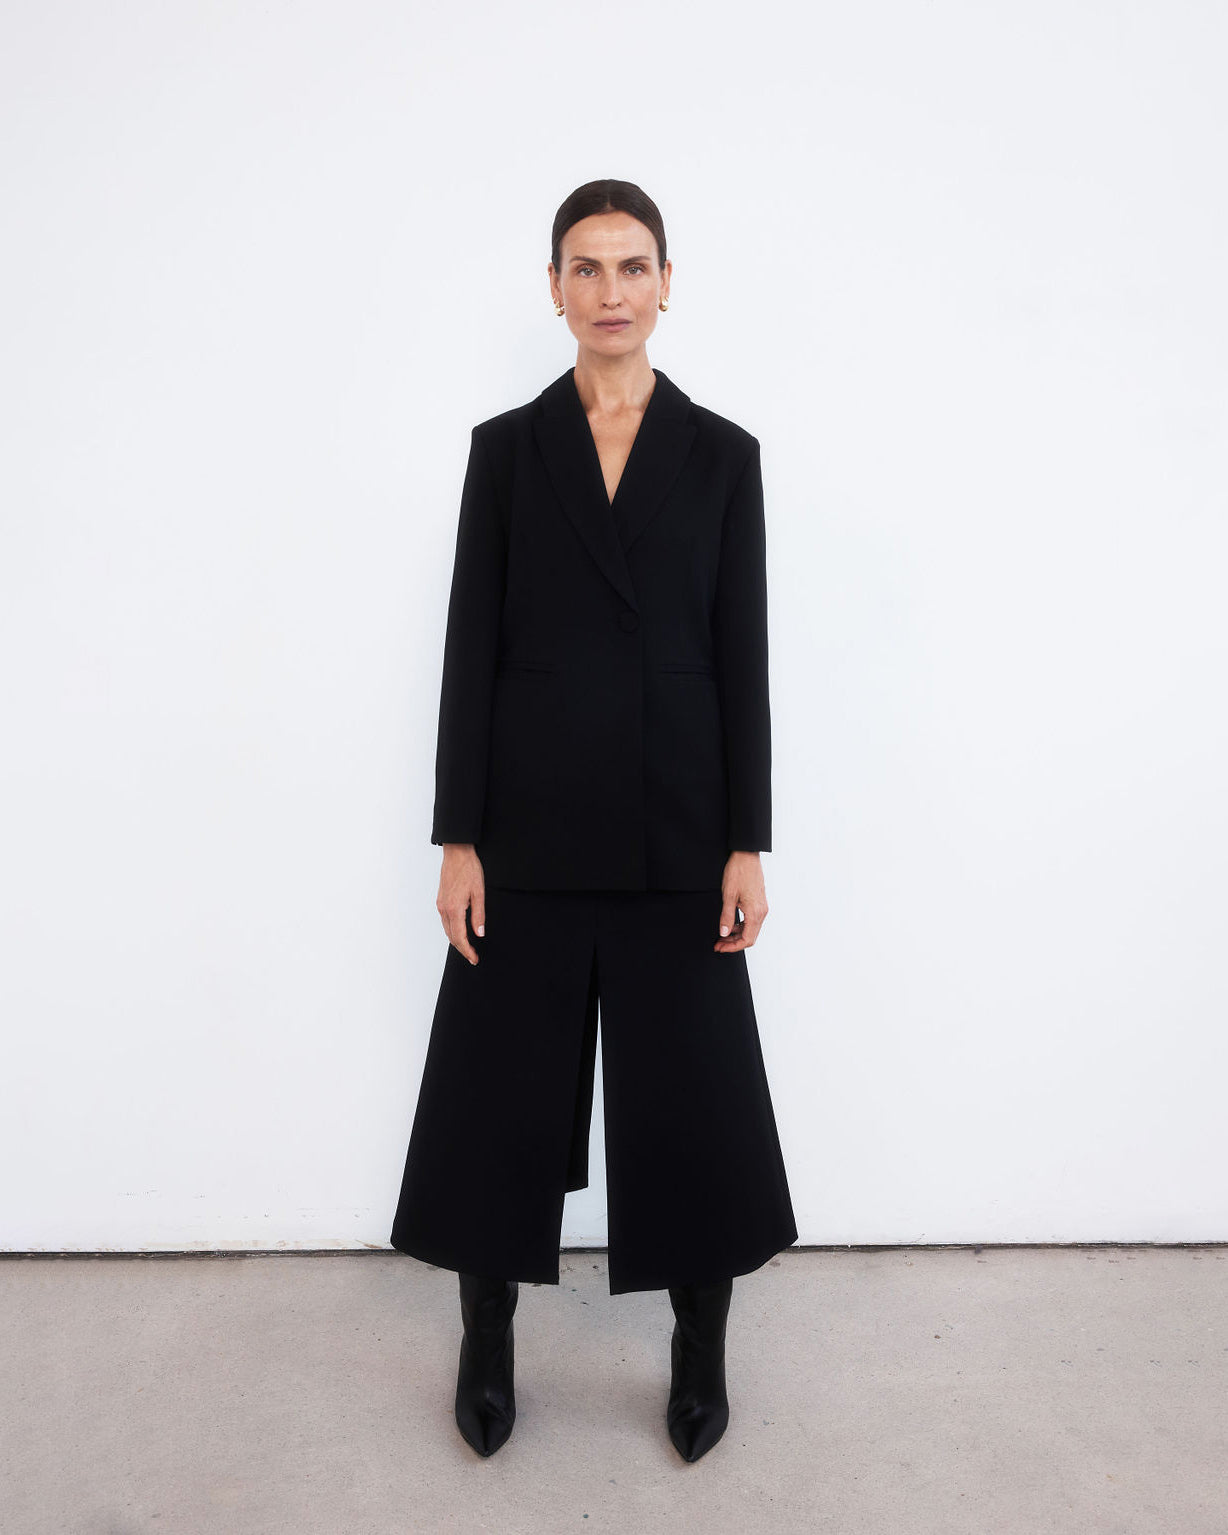 Middle aged women with brown pulled back hair wearing an all black look with a minimalist tailored black blazer, maxi length skirt with middle split and black wedge pointed boots